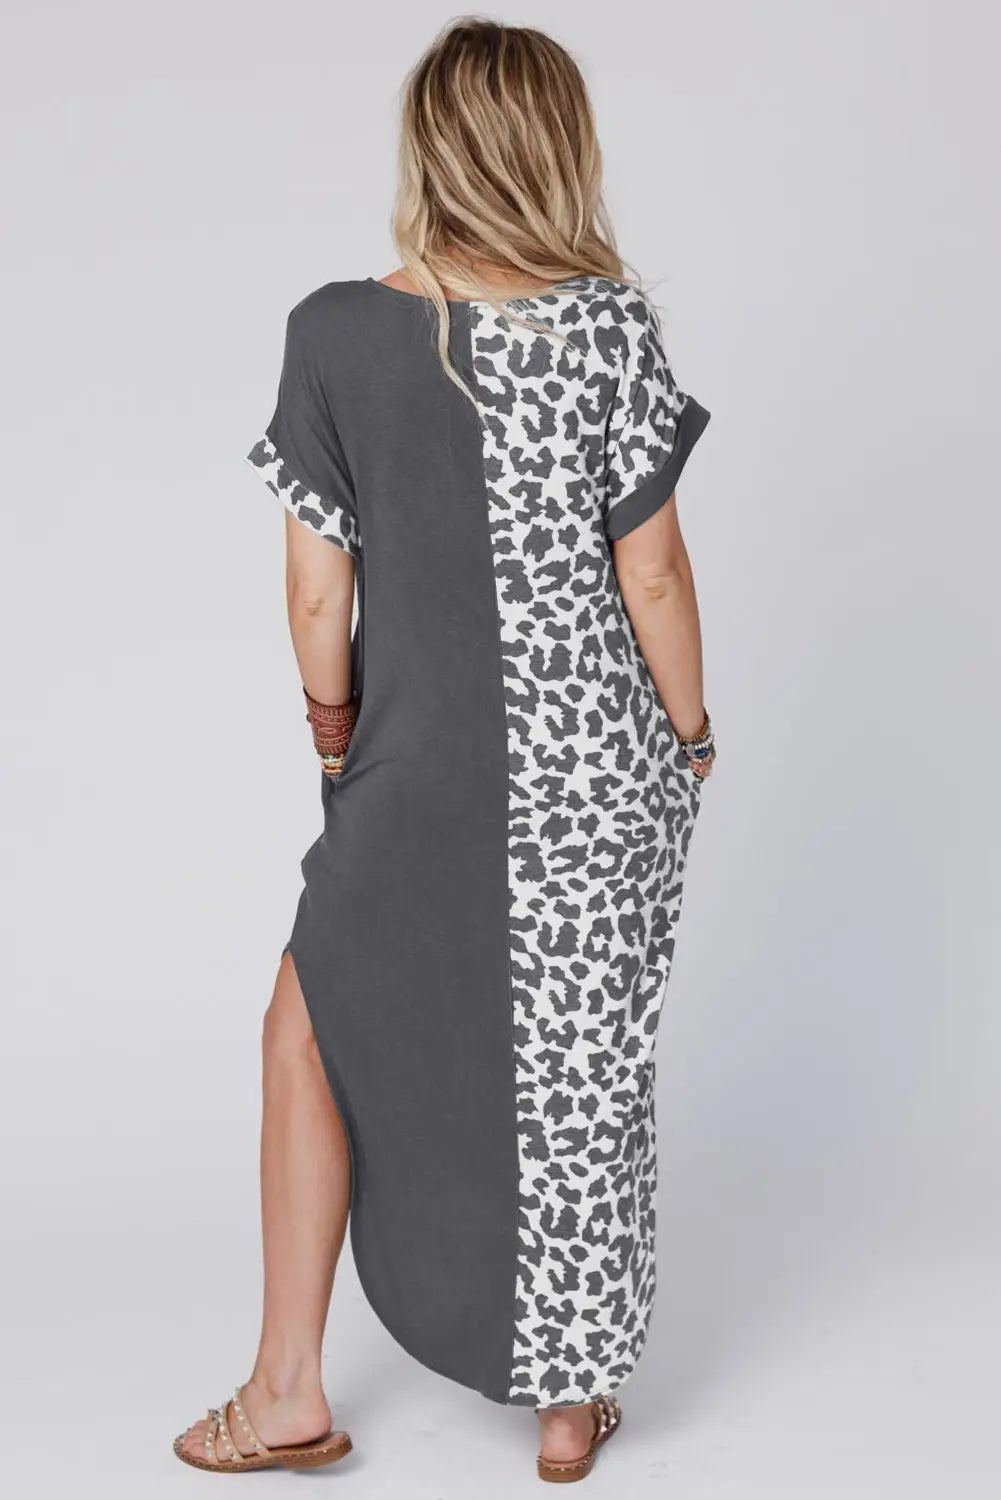 Gray contrast solid leopard short sleeve t-shirt dress with slits - t-shirt dresses